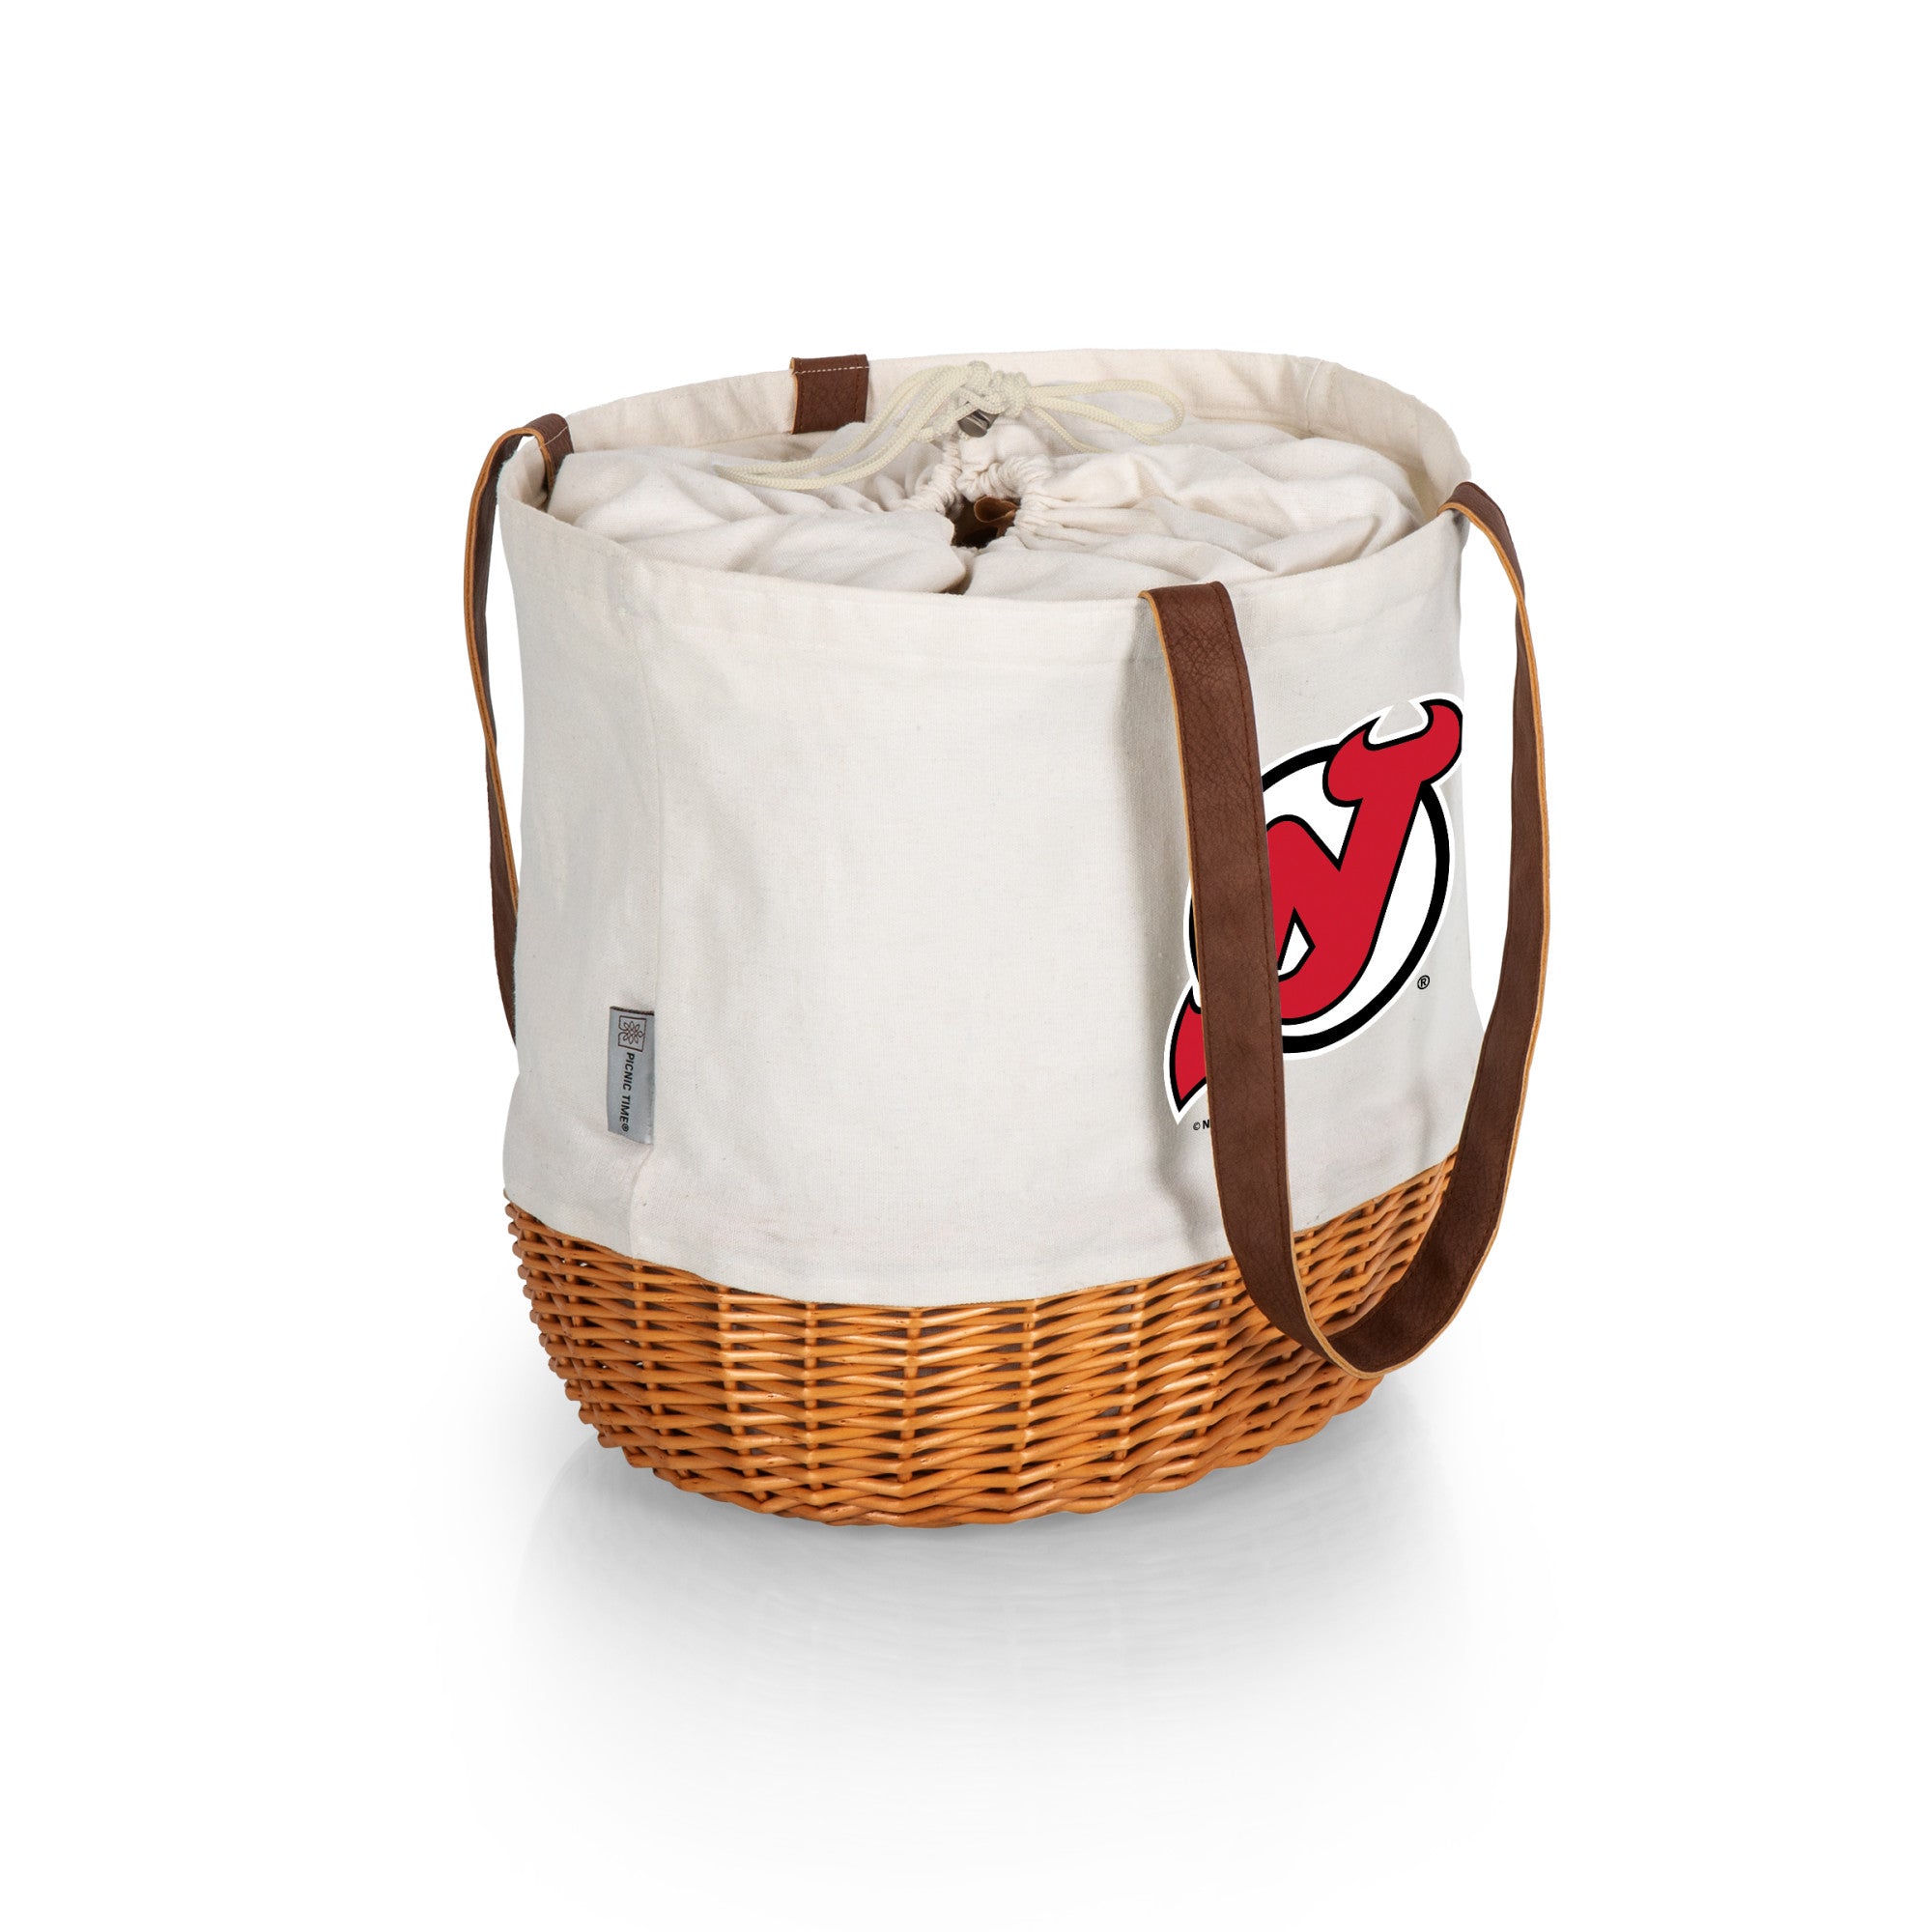 New Jersey Devils - Coronado Canvas and Willow Basket Tote